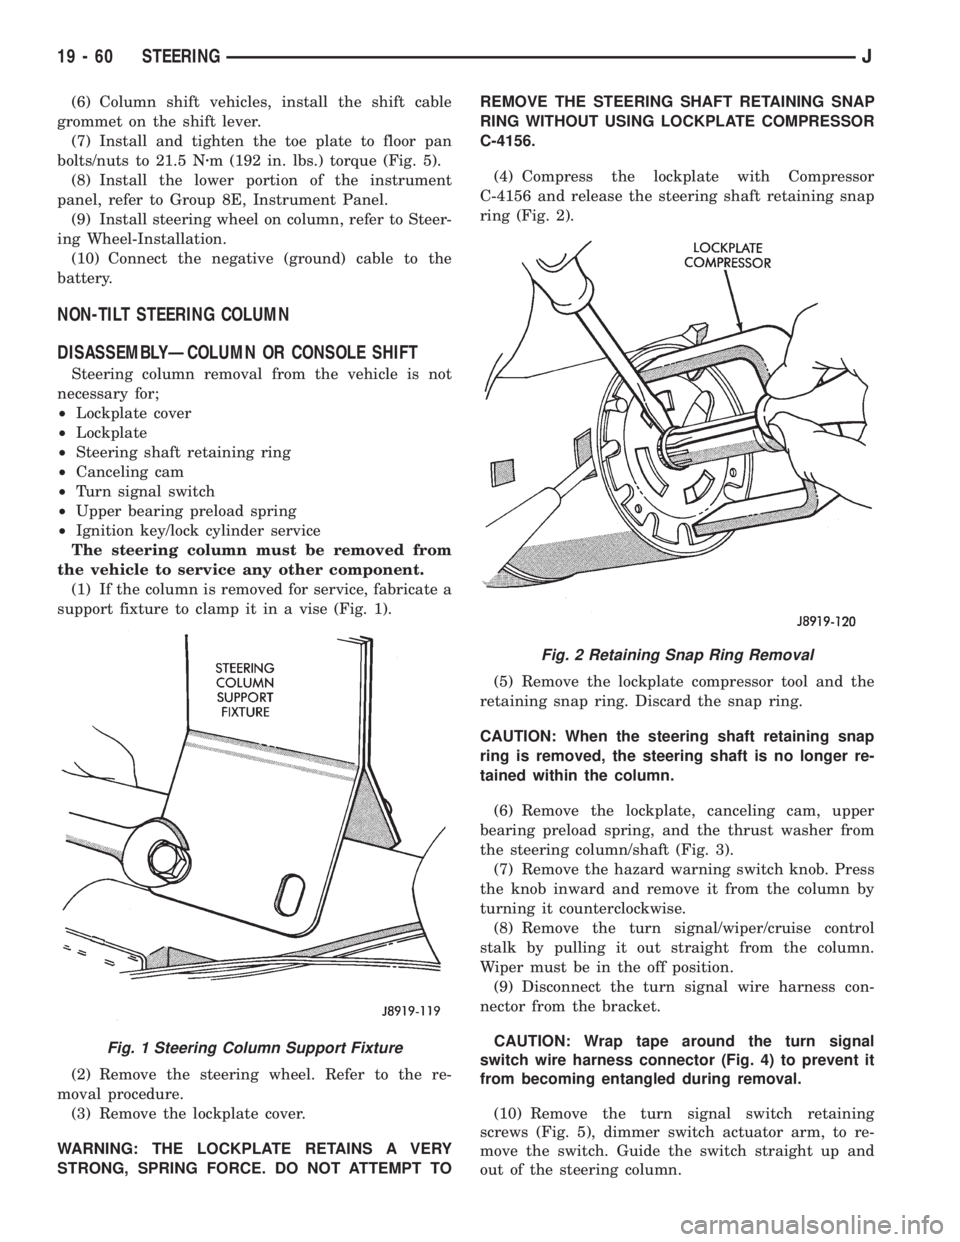 JEEP XJ 1995  Service And Repair Manual (6) Column shift vehicles, install the shift cable
grommet on the shift lever.
(7) Install and tighten the toe plate to floor pan
bolts/nuts to 21.5 Nzm (192 in. lbs.) torque (Fig. 5).
(8) Install the